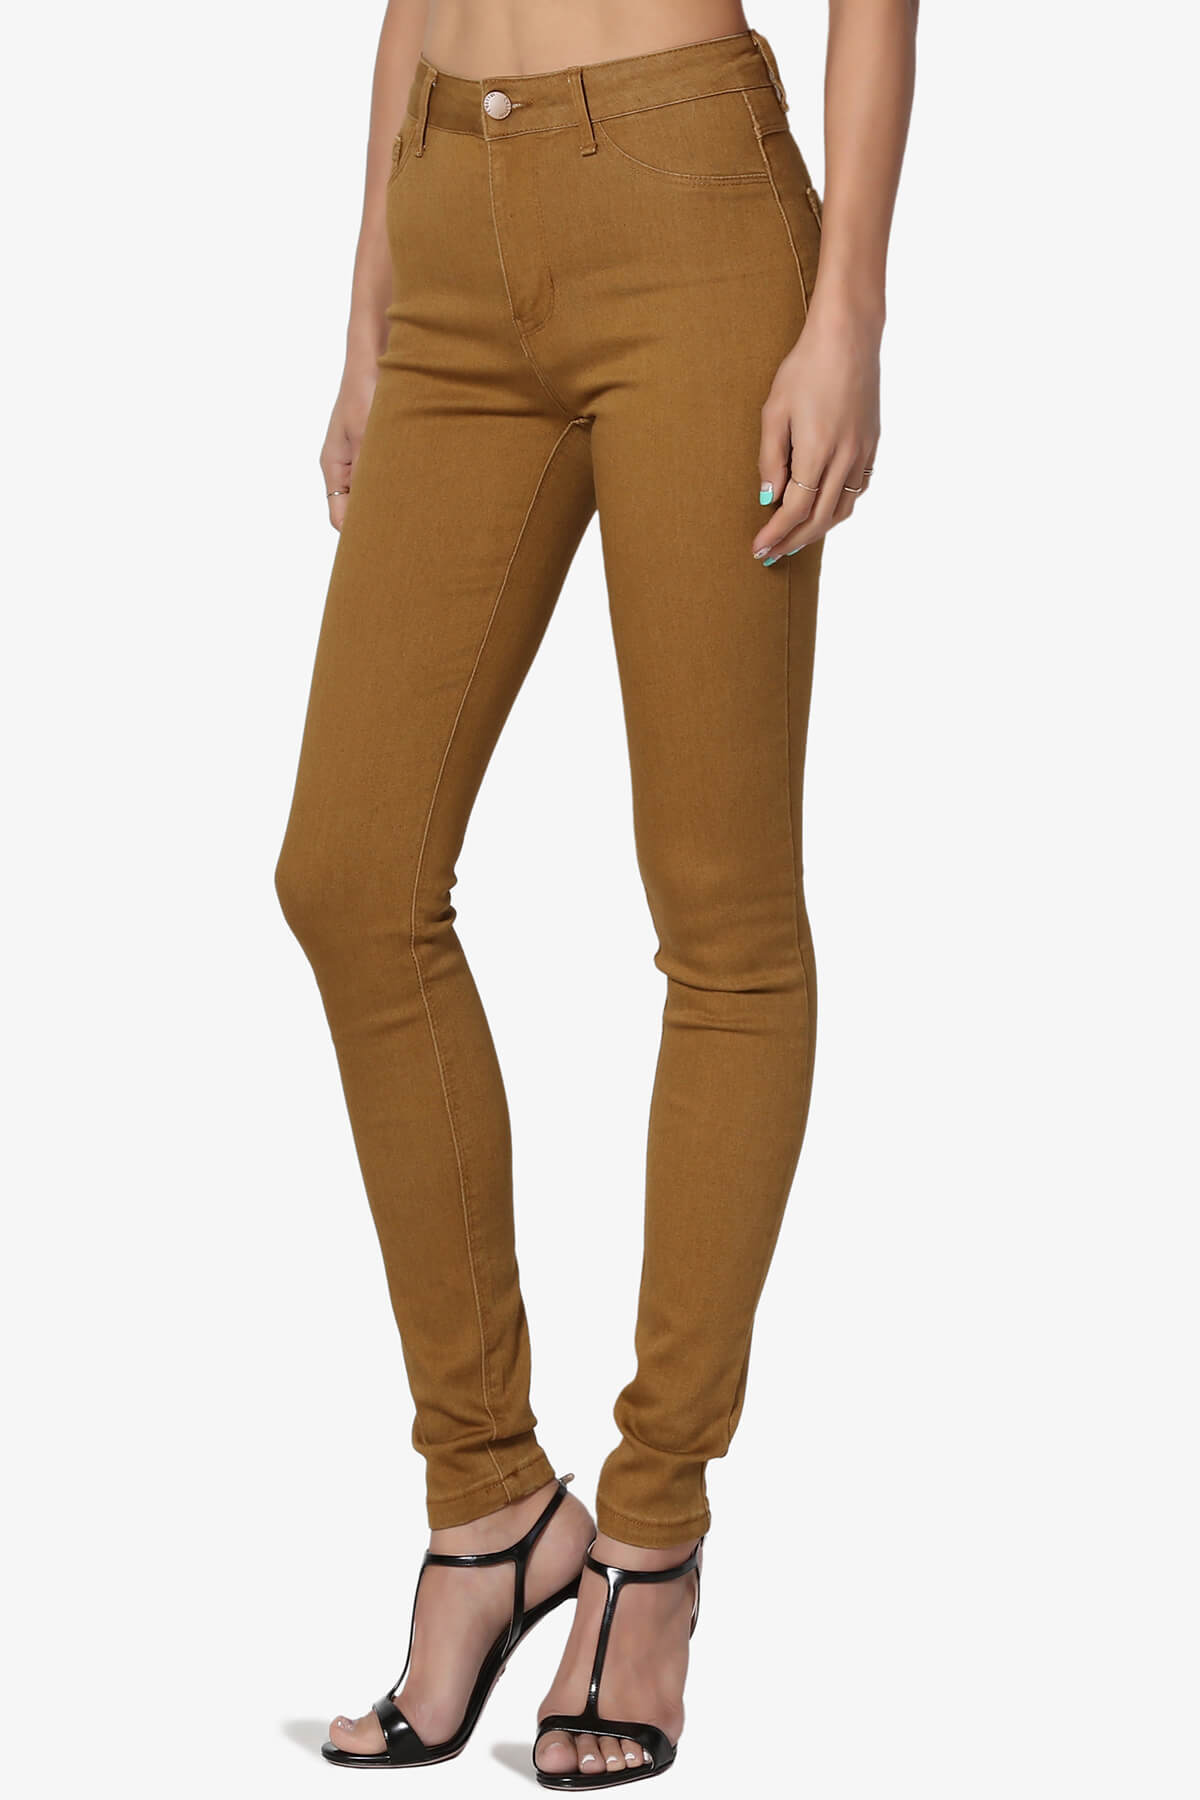 Women's Must-Have Colored High Rise Ankle Skinny Jeans Stretch Denim Jeggings - image 3 of 7